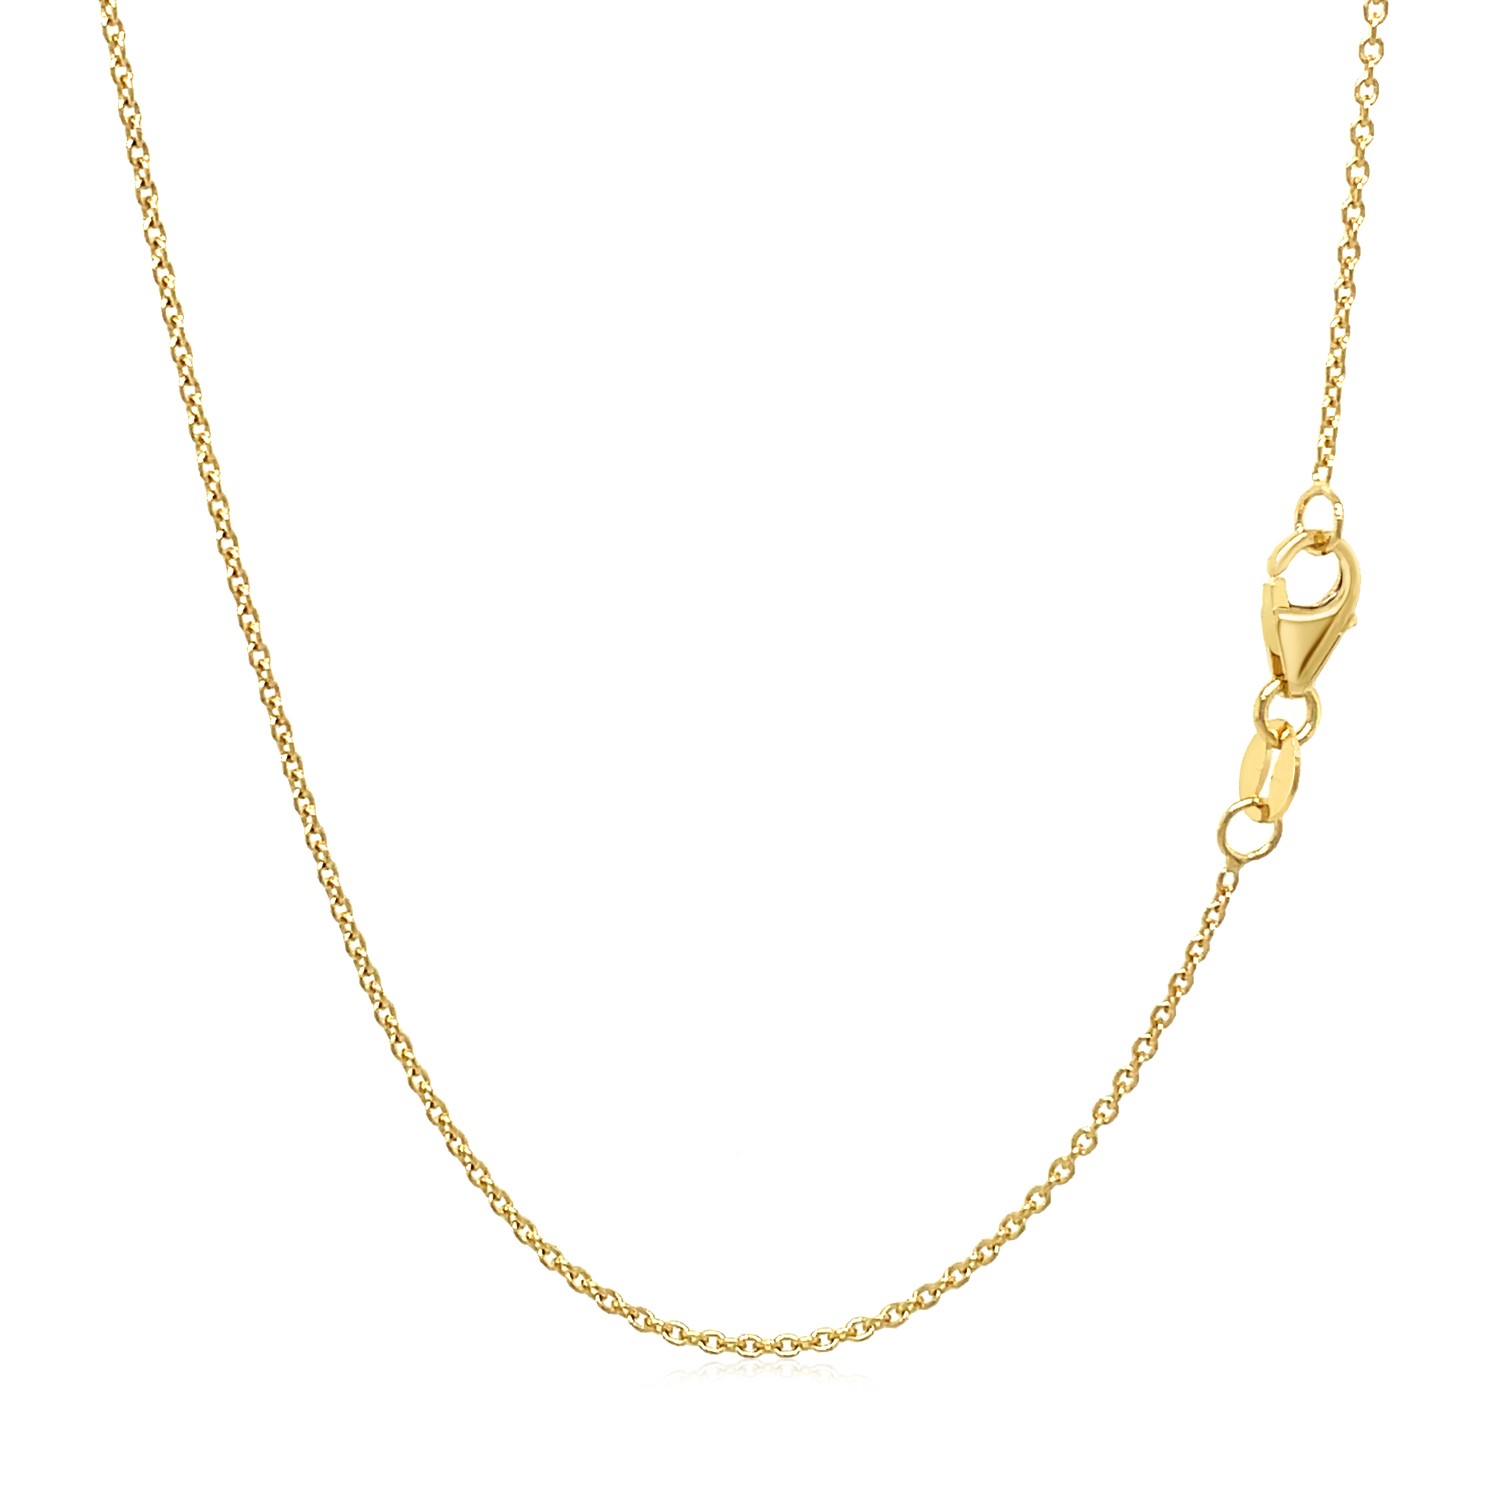 14k Yellow Gold Round Cable Link Chain 1.1mm Size 18 inches - image 3 of 4